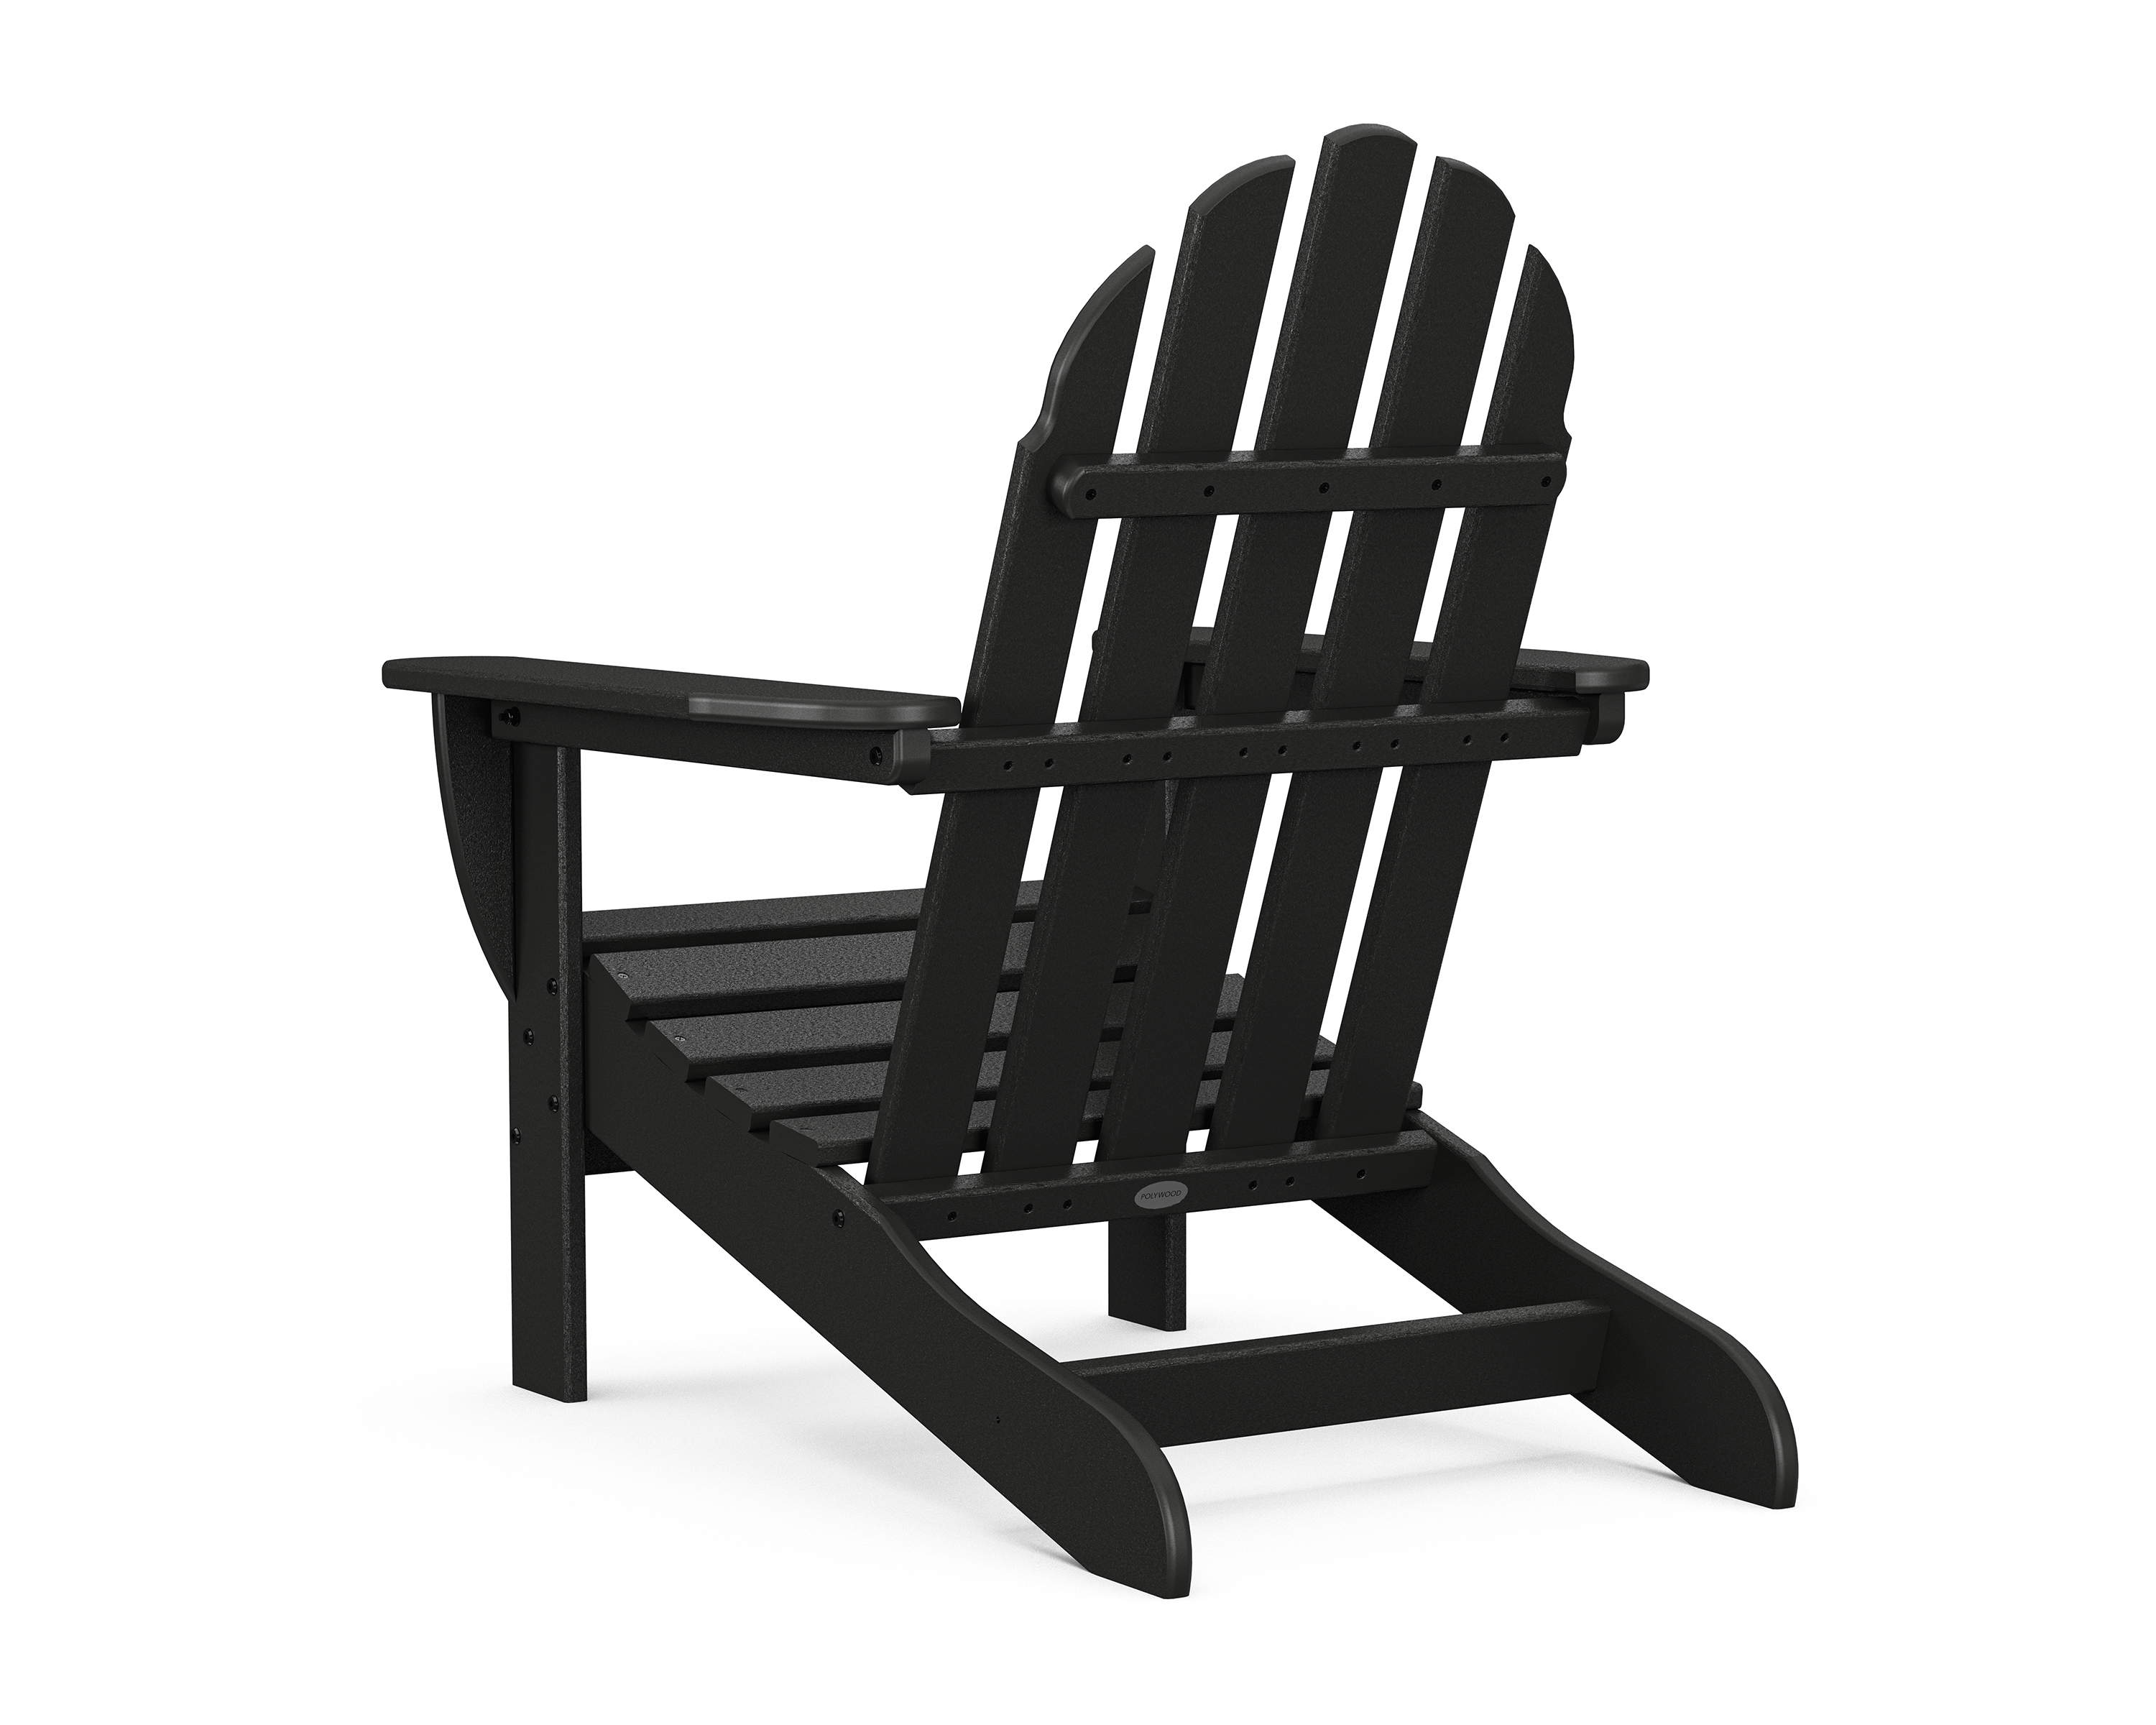 POLYWOOD Classic Adirondack 3-Piece Set with South Beach 18" Side Table in Black - image 4 of 5